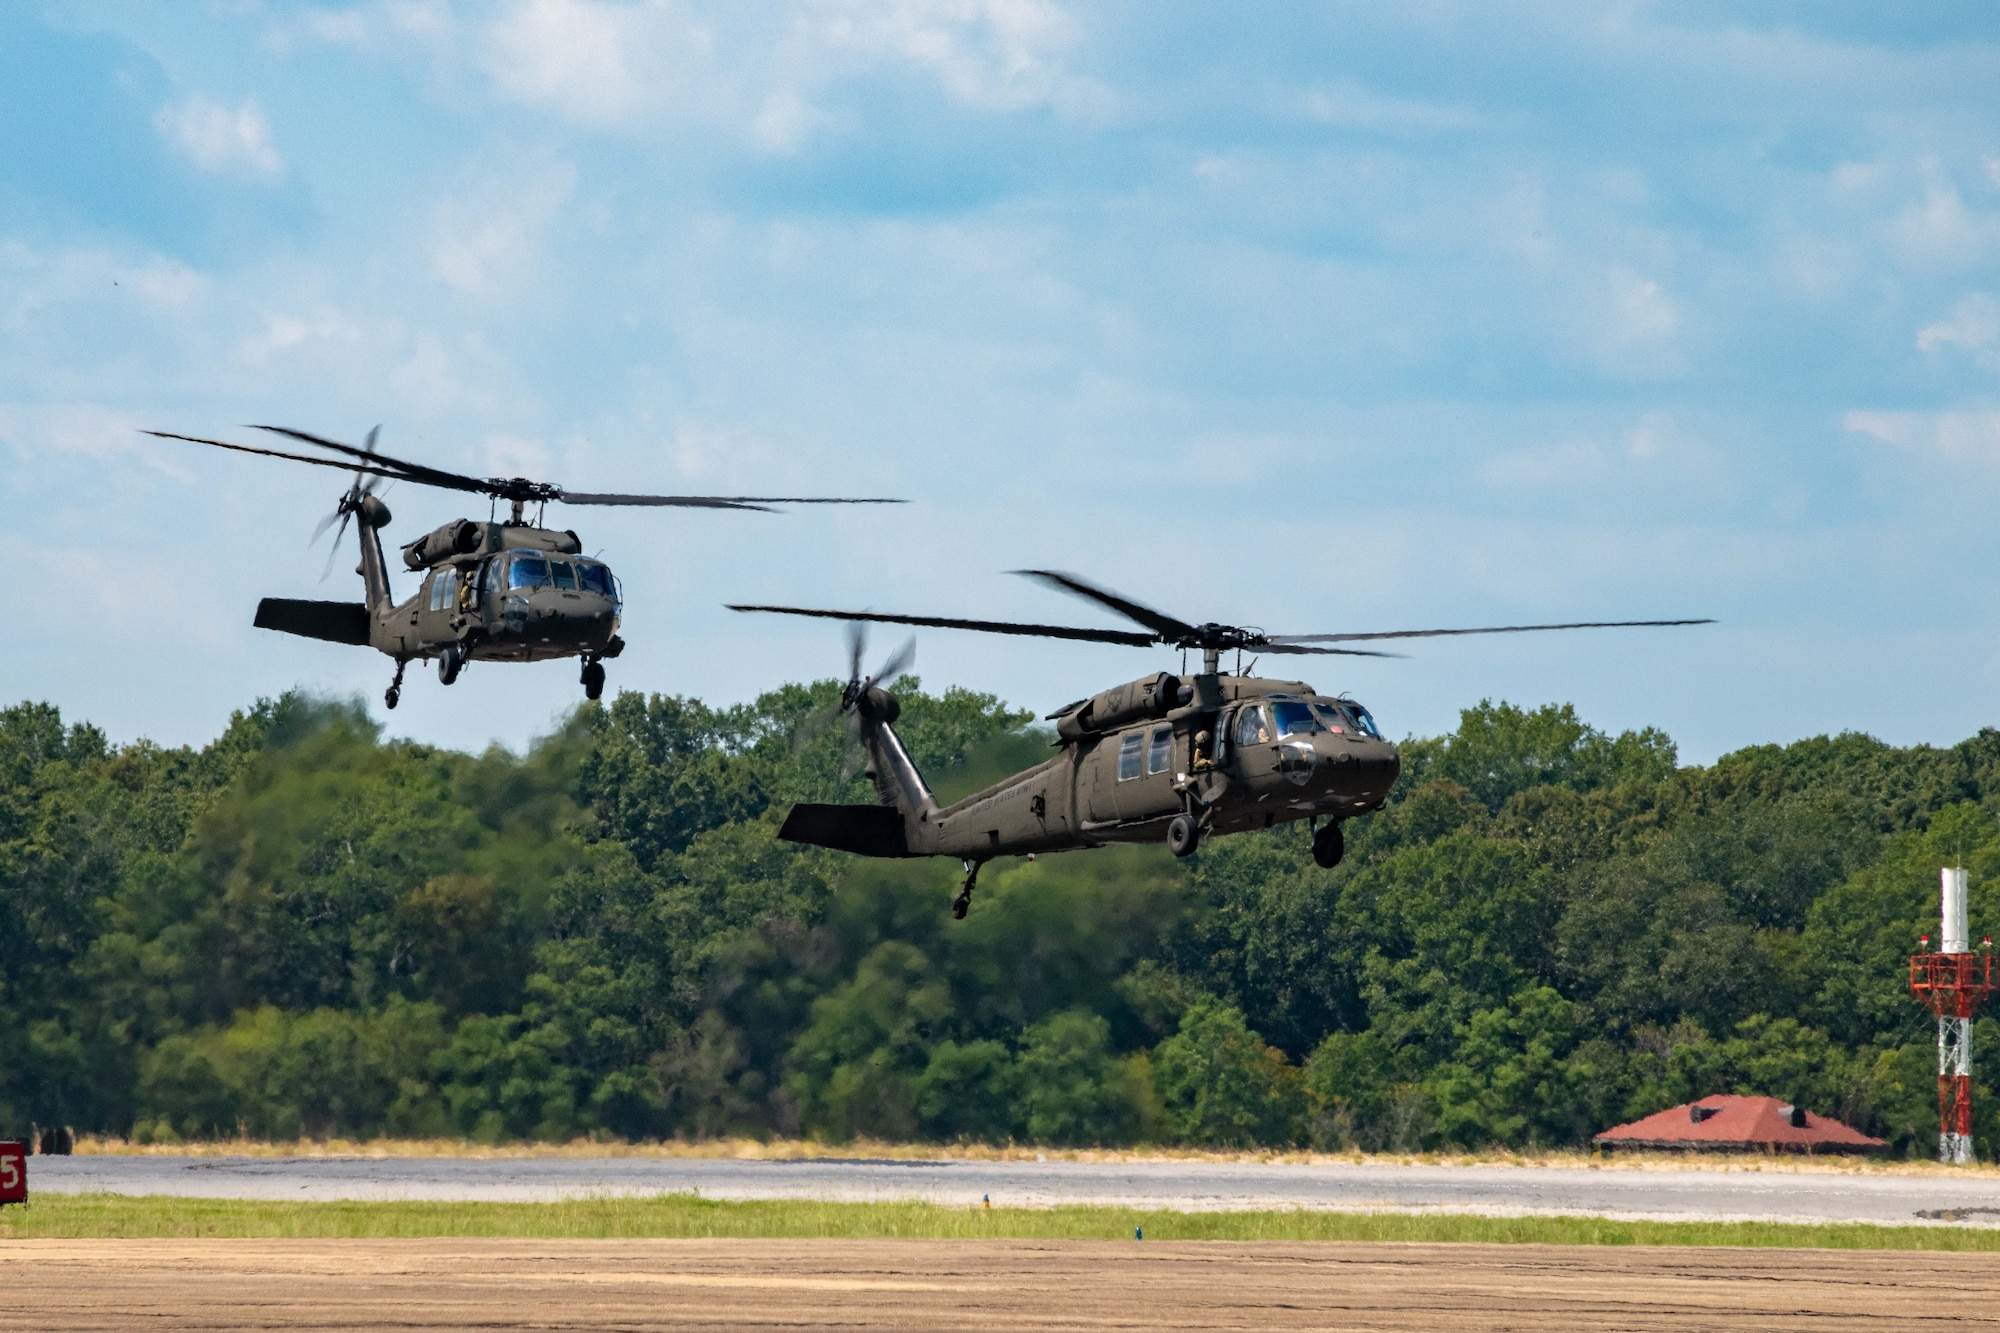 UH-60 Black Hawk helicopters